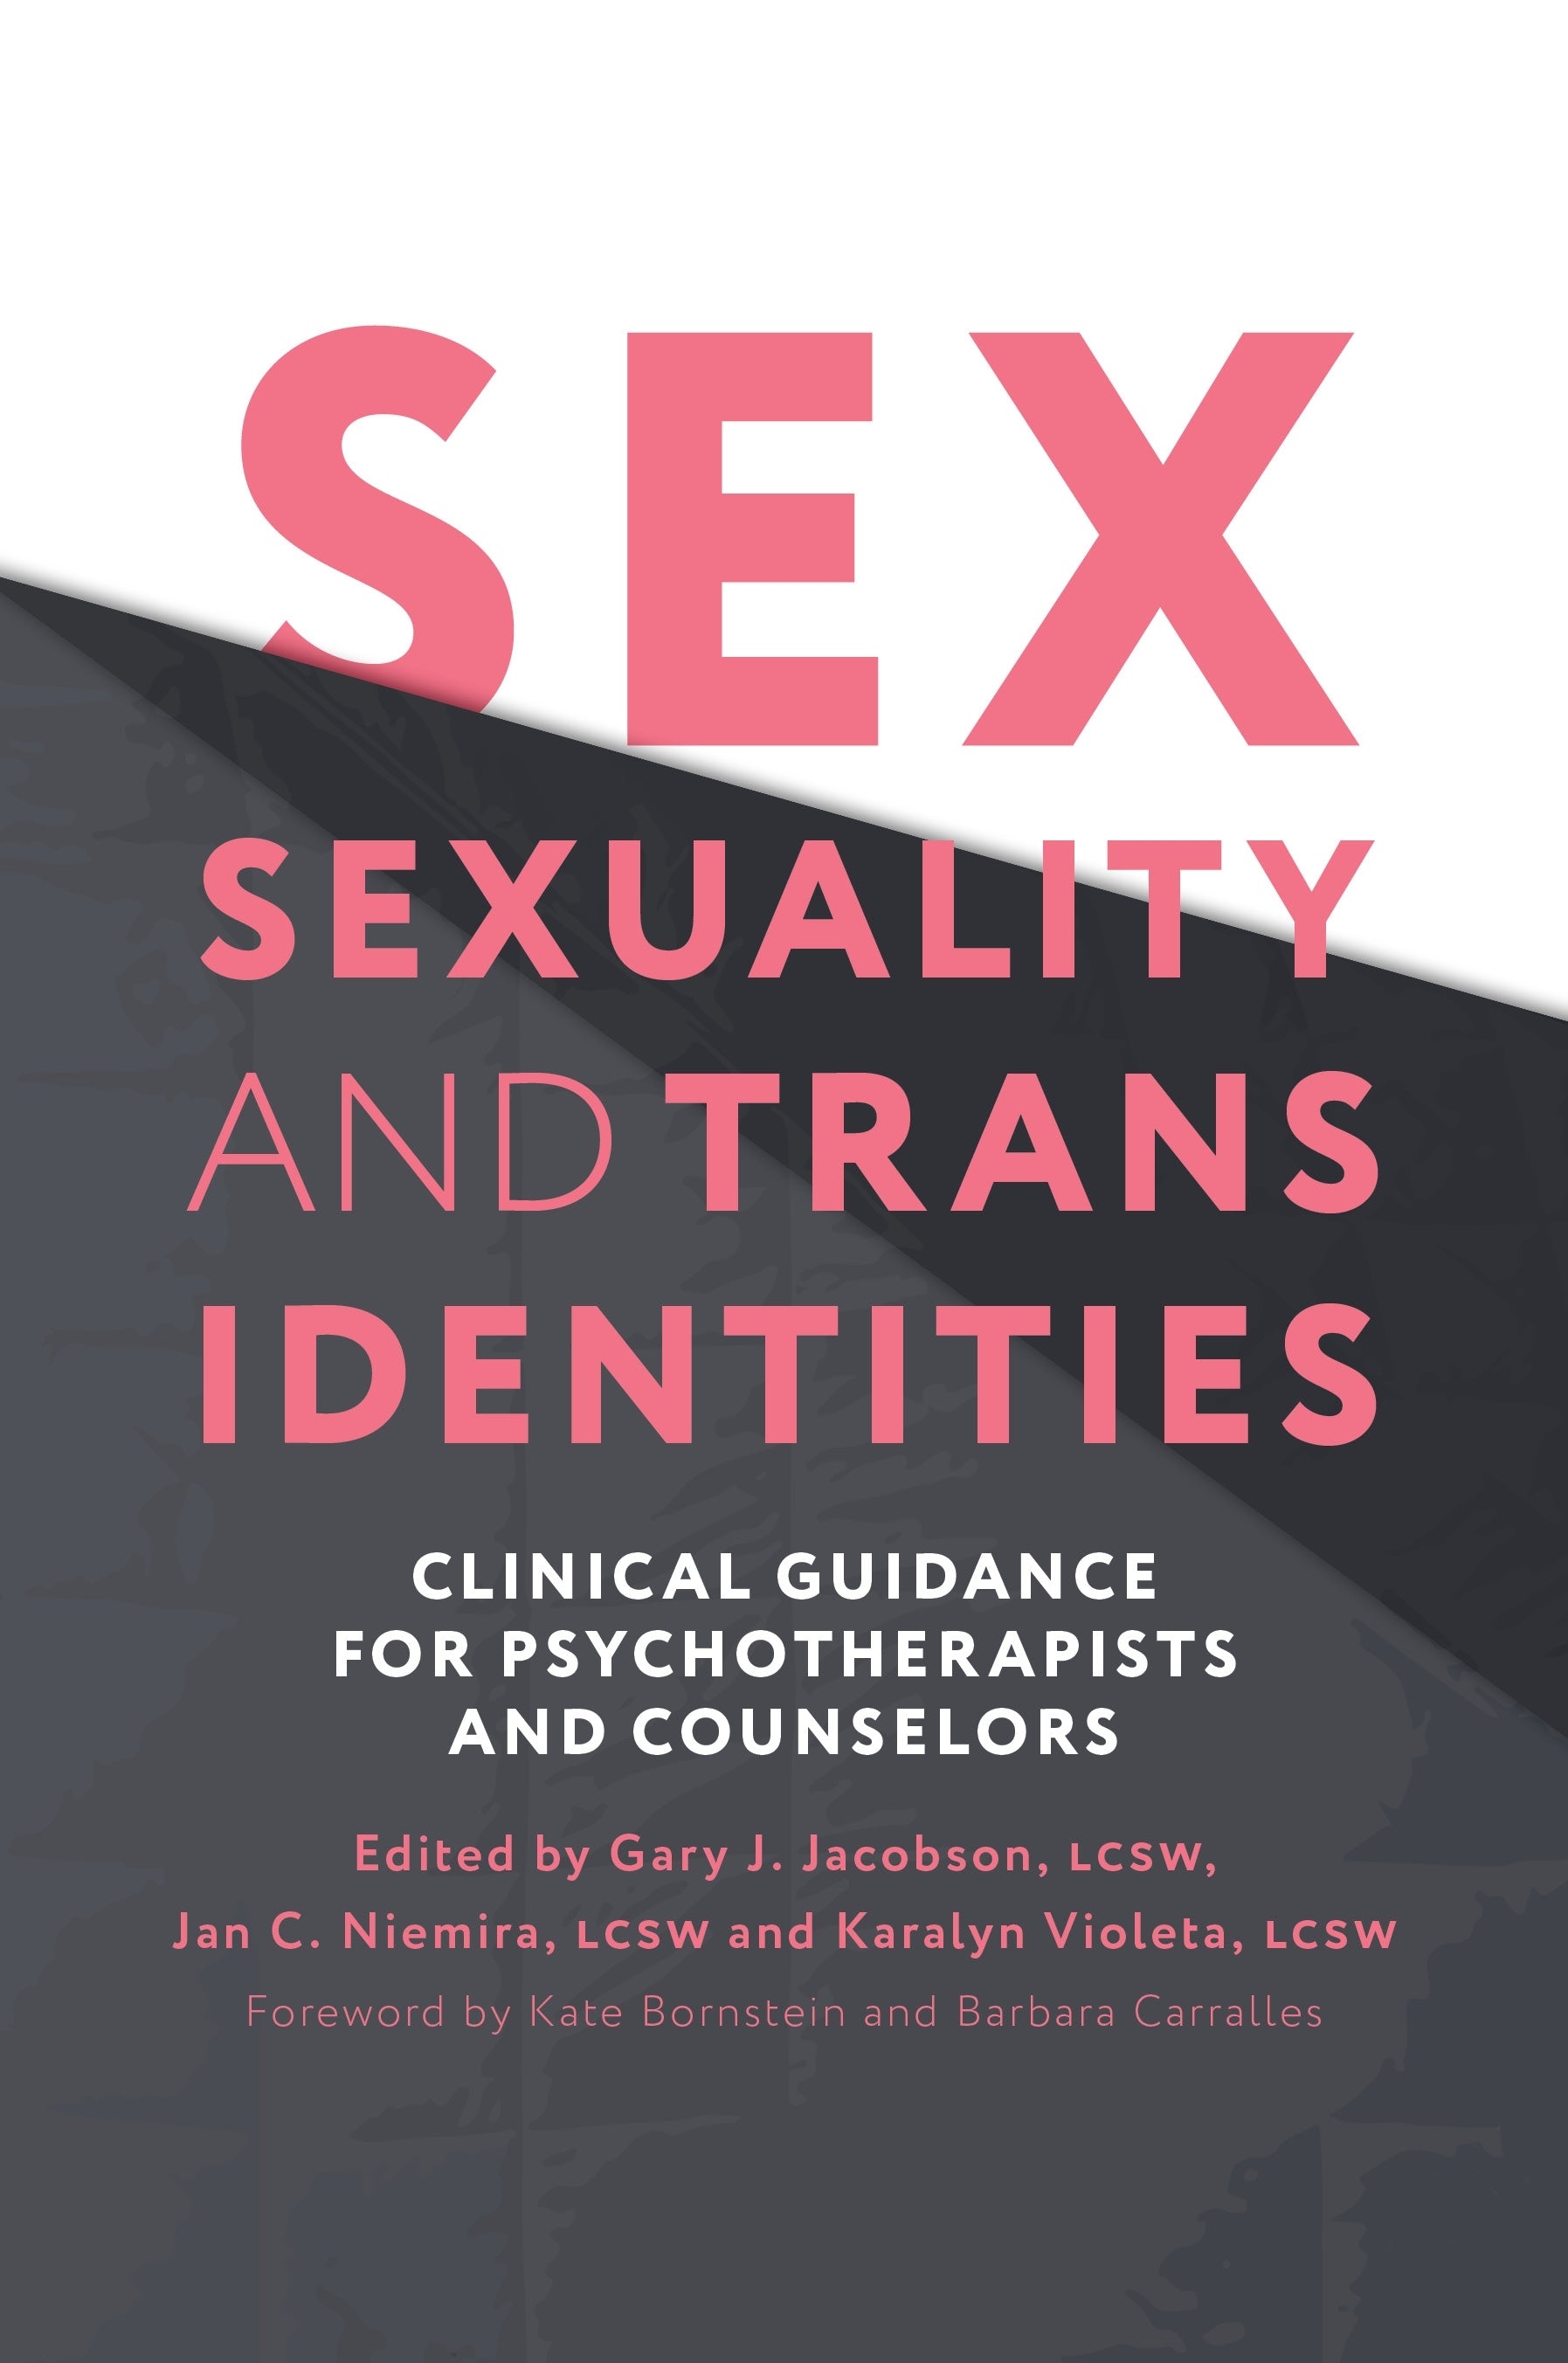 Sex, Sexuality, and Trans Identities by No Author Listed, Jan C. Niemira, Gary J Jacobson, Karalyn J Violeta, Barbara Carralles, Kate Bornstein